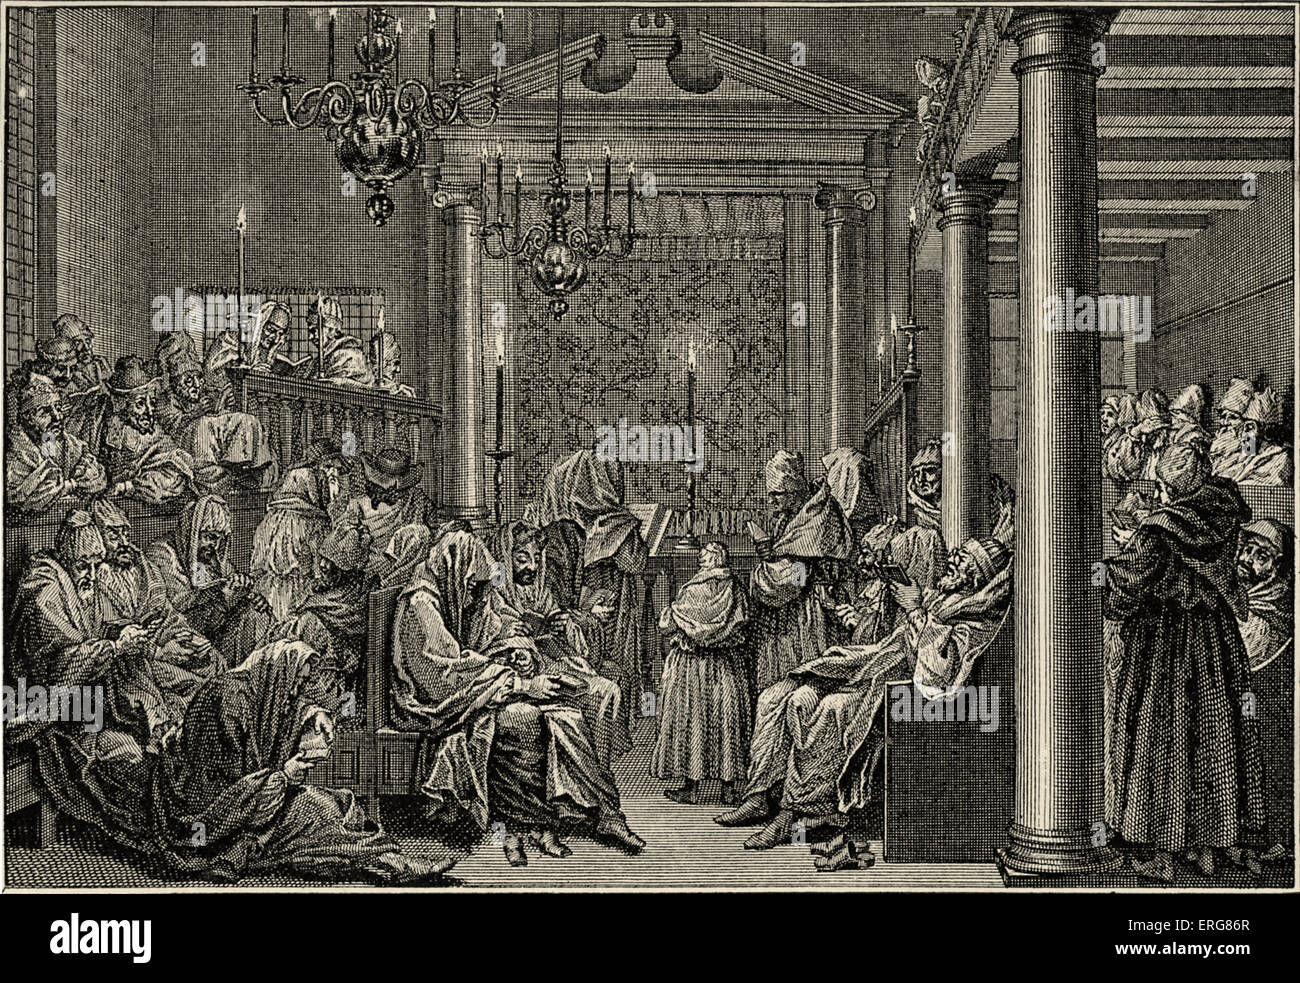 Day of Atonement / Yom Kippur in the synagogue according to the German custom.. 1723. Men wearing prayer shawls, without shoes as they are fasting. Stock Photo